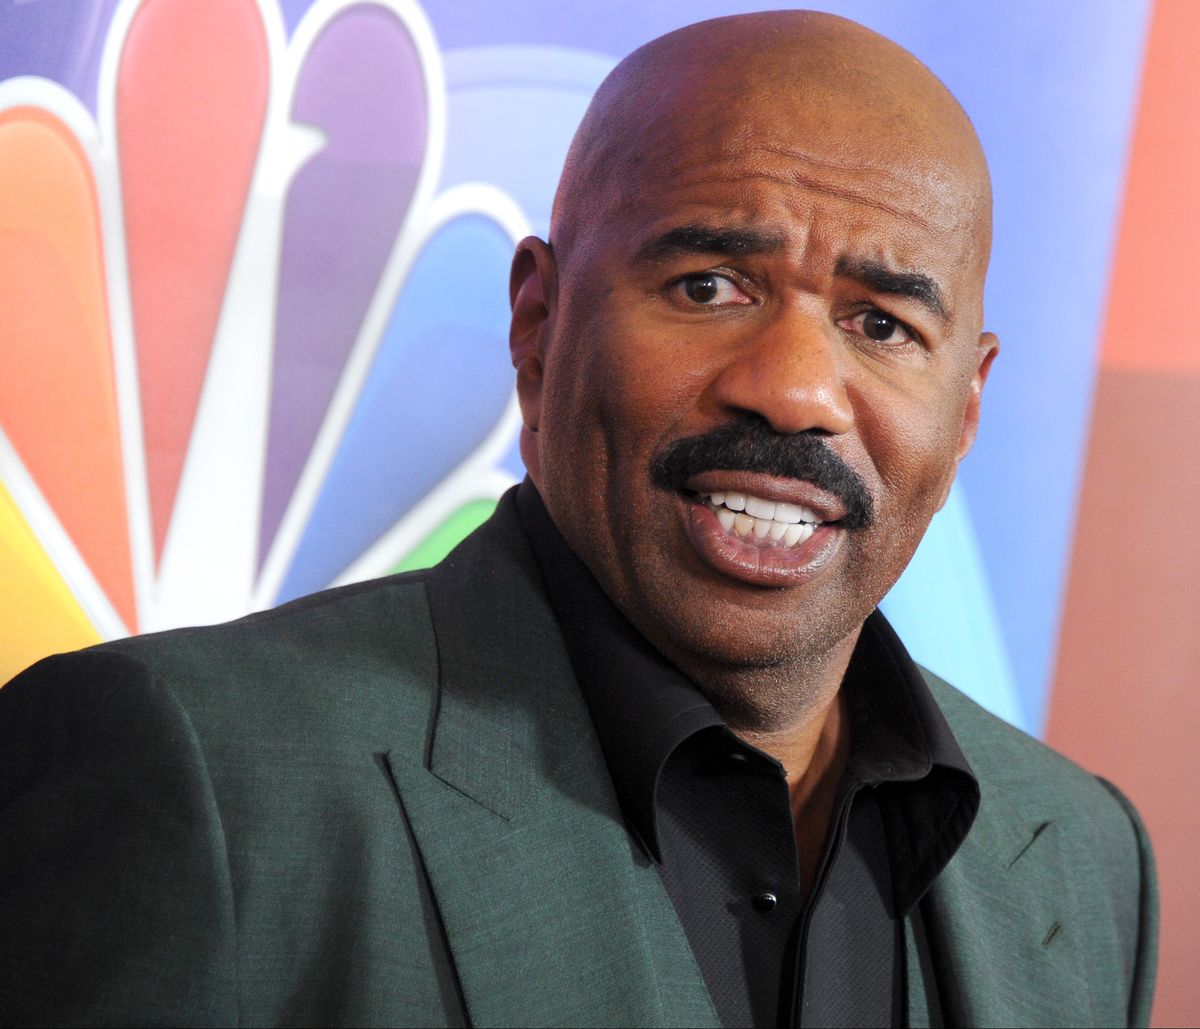 Is the Steve Harvey Talk Show Canceled? - Steve Harvey Hints He Might Leave Because of Kelly Clarkson 